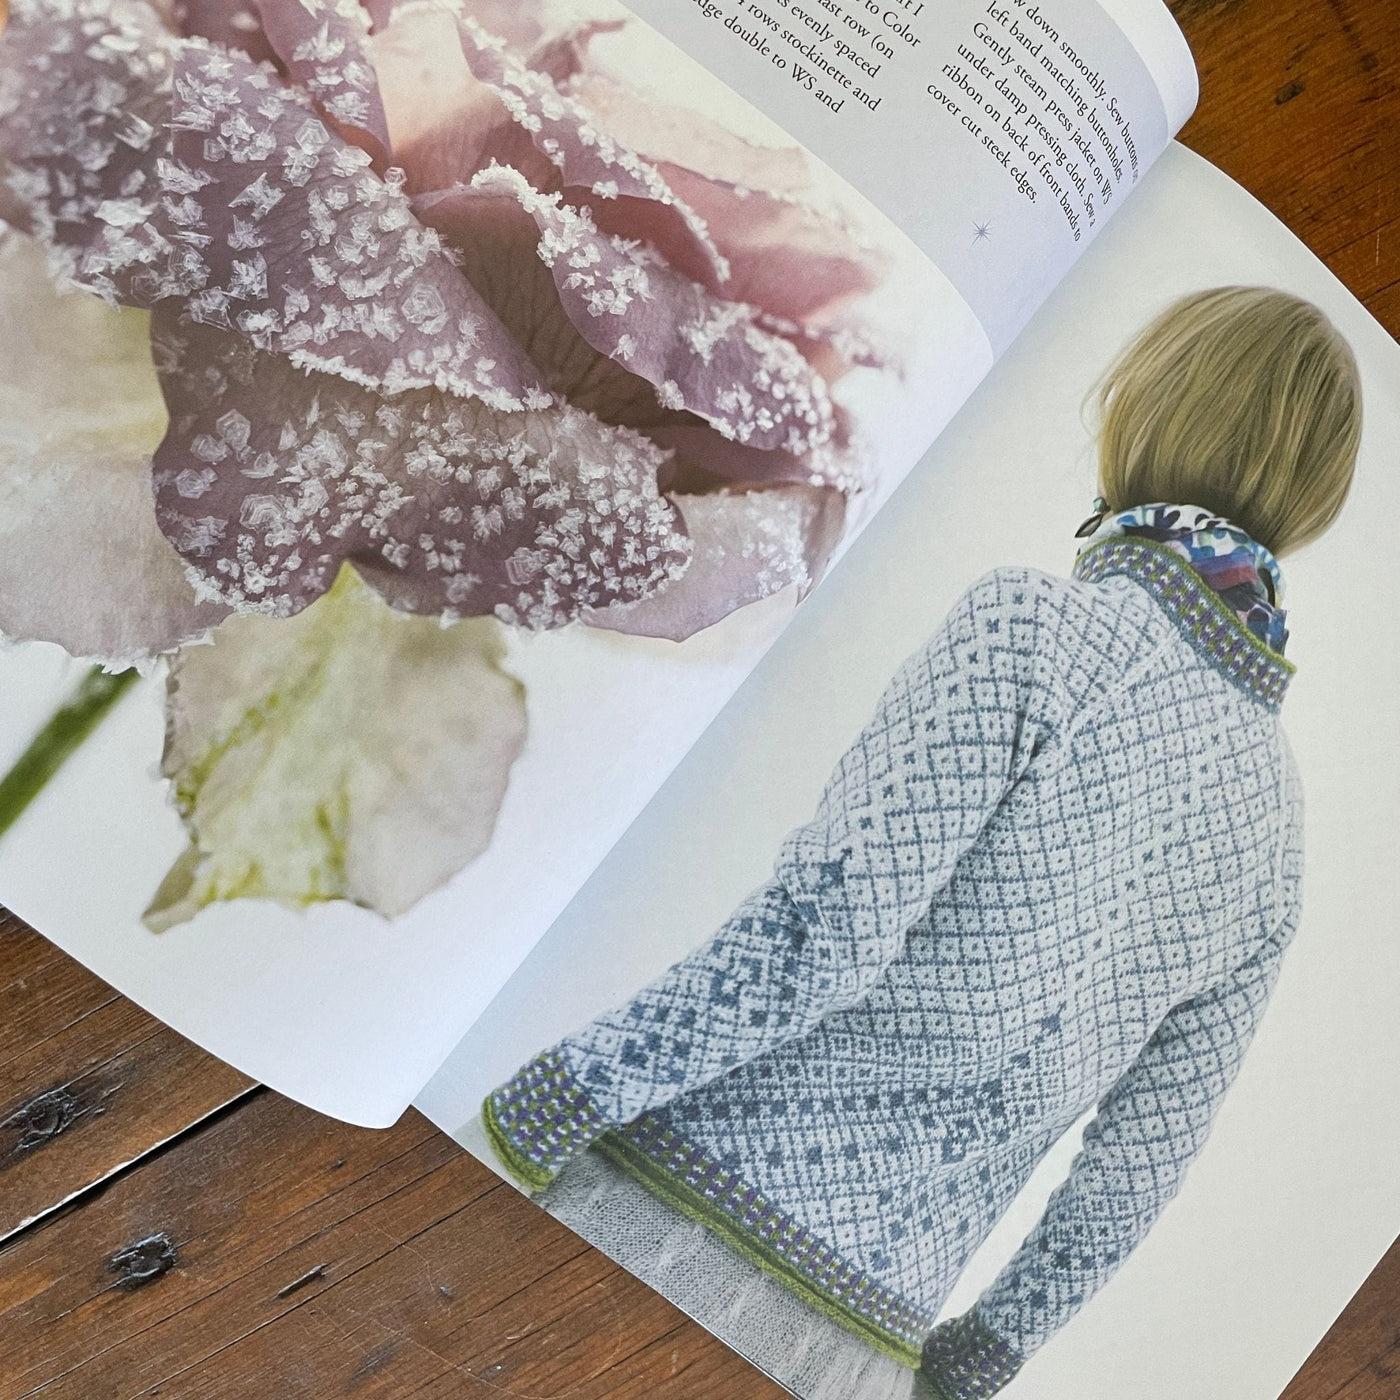 Inside pages of book Norwegian Sweaters & Jackets by Kari Hestnes shows back view of woman wearing colorwork sweater with flower on opposite page.